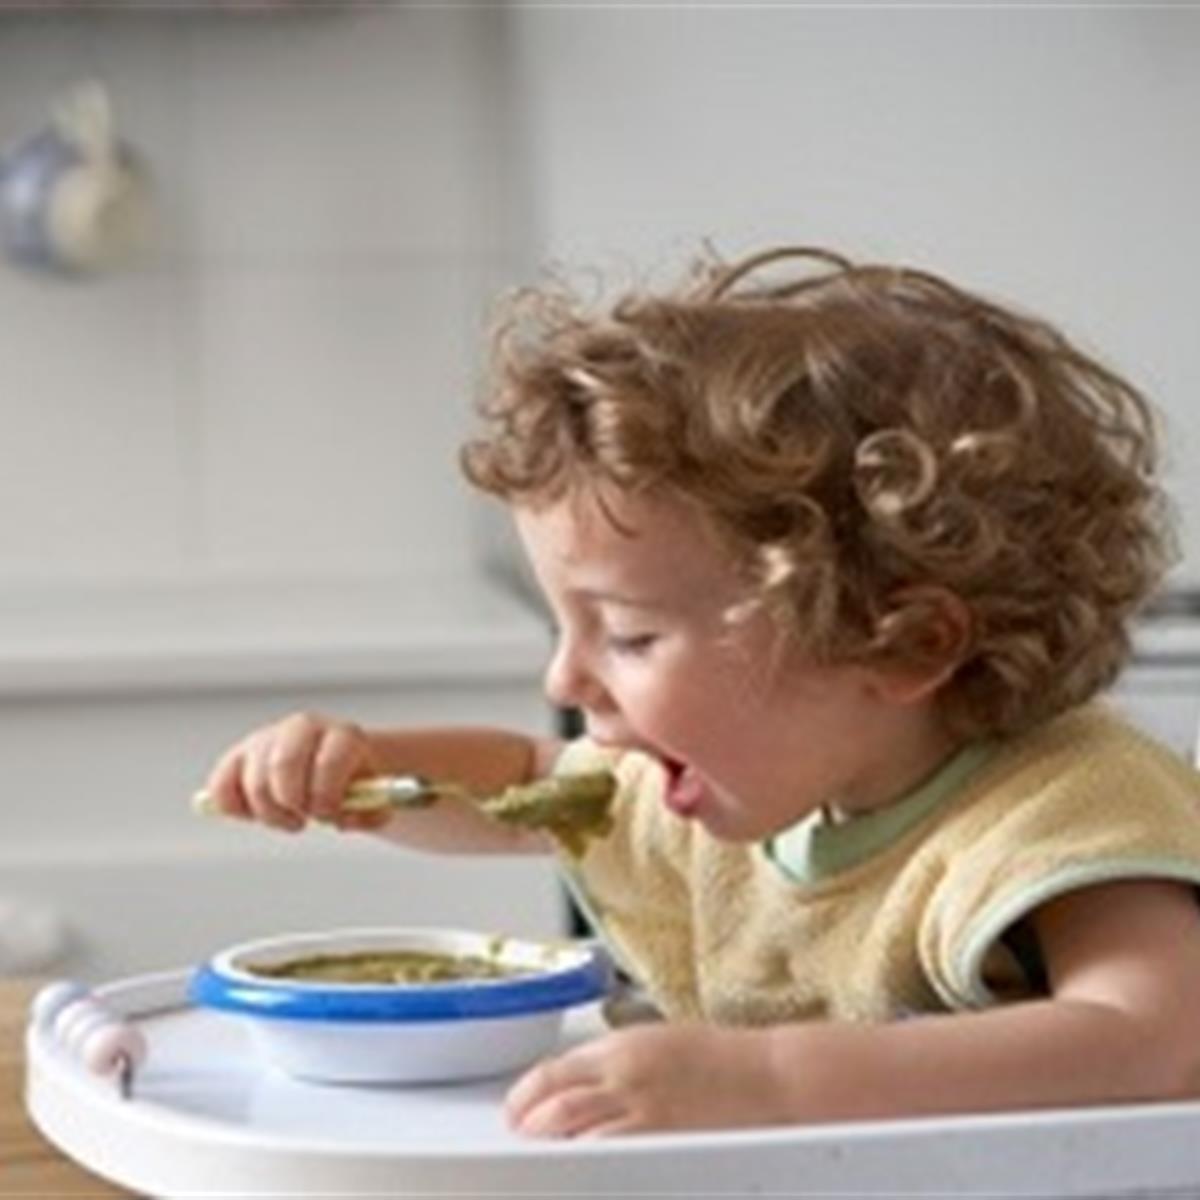 10 Tips for Parents of Picky Eaters - HealthyChildren.org